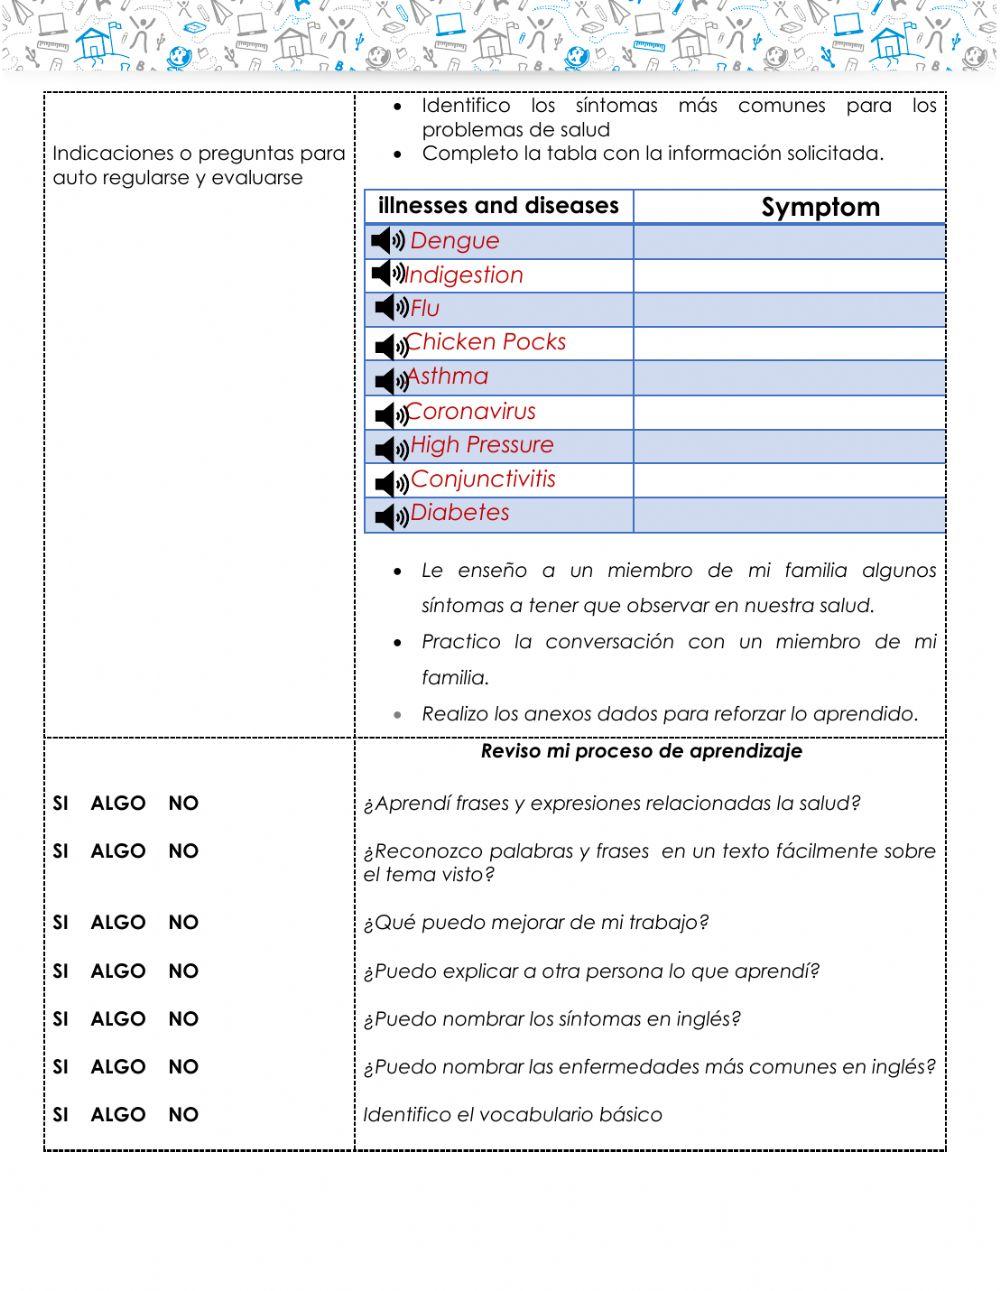 “Common diseases and epidemics in the world”